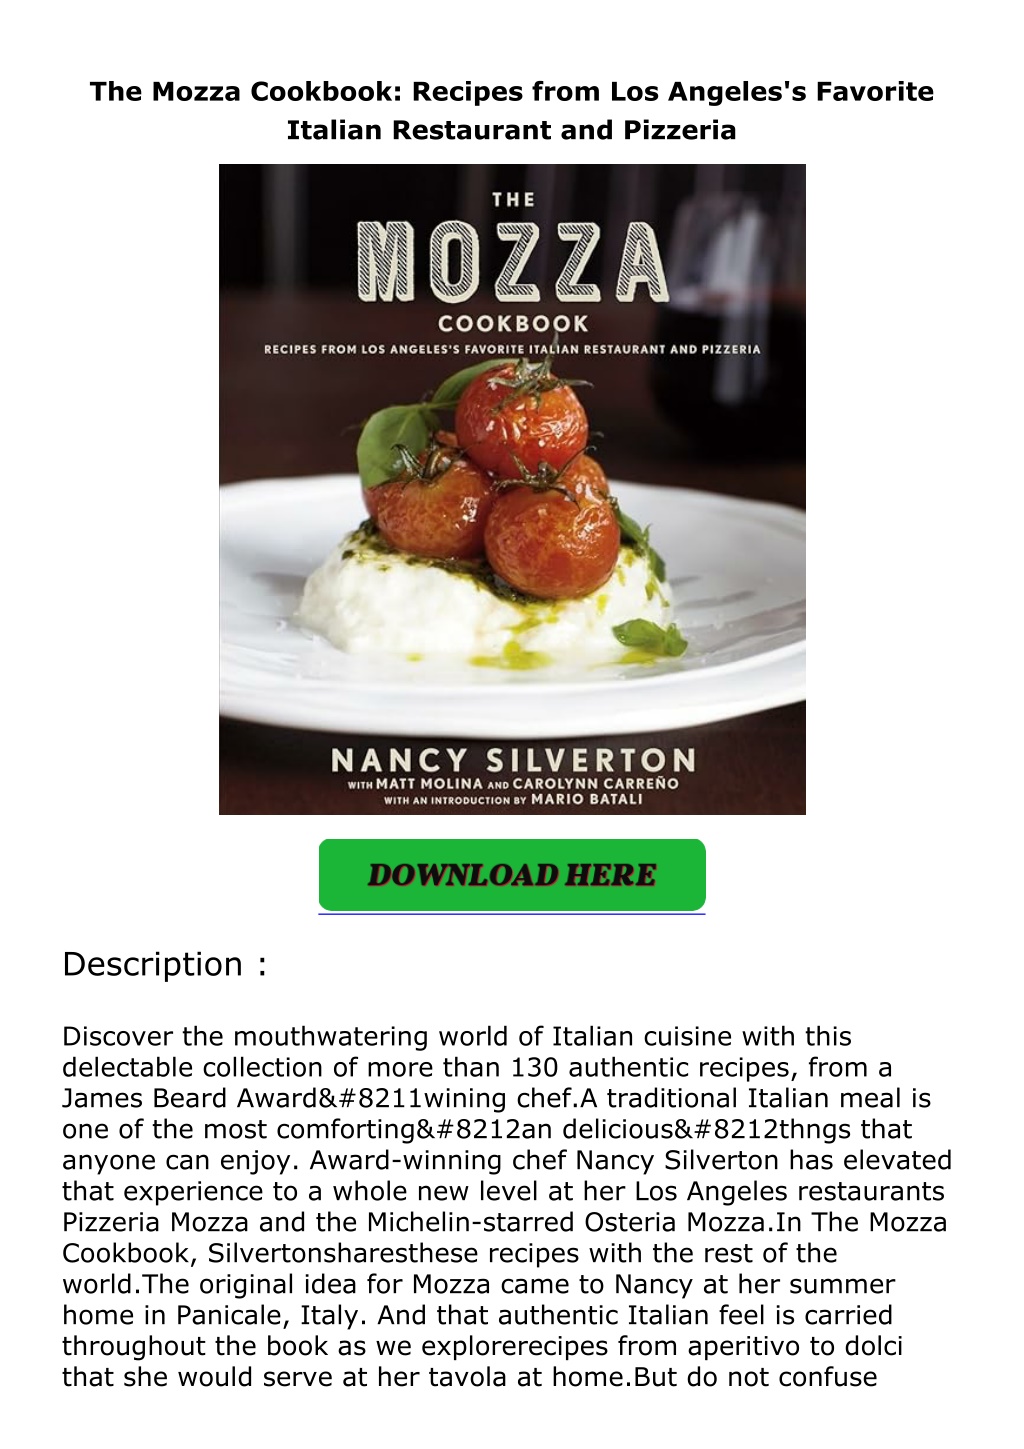 the mozza cookbook recipes from los angeles l.w